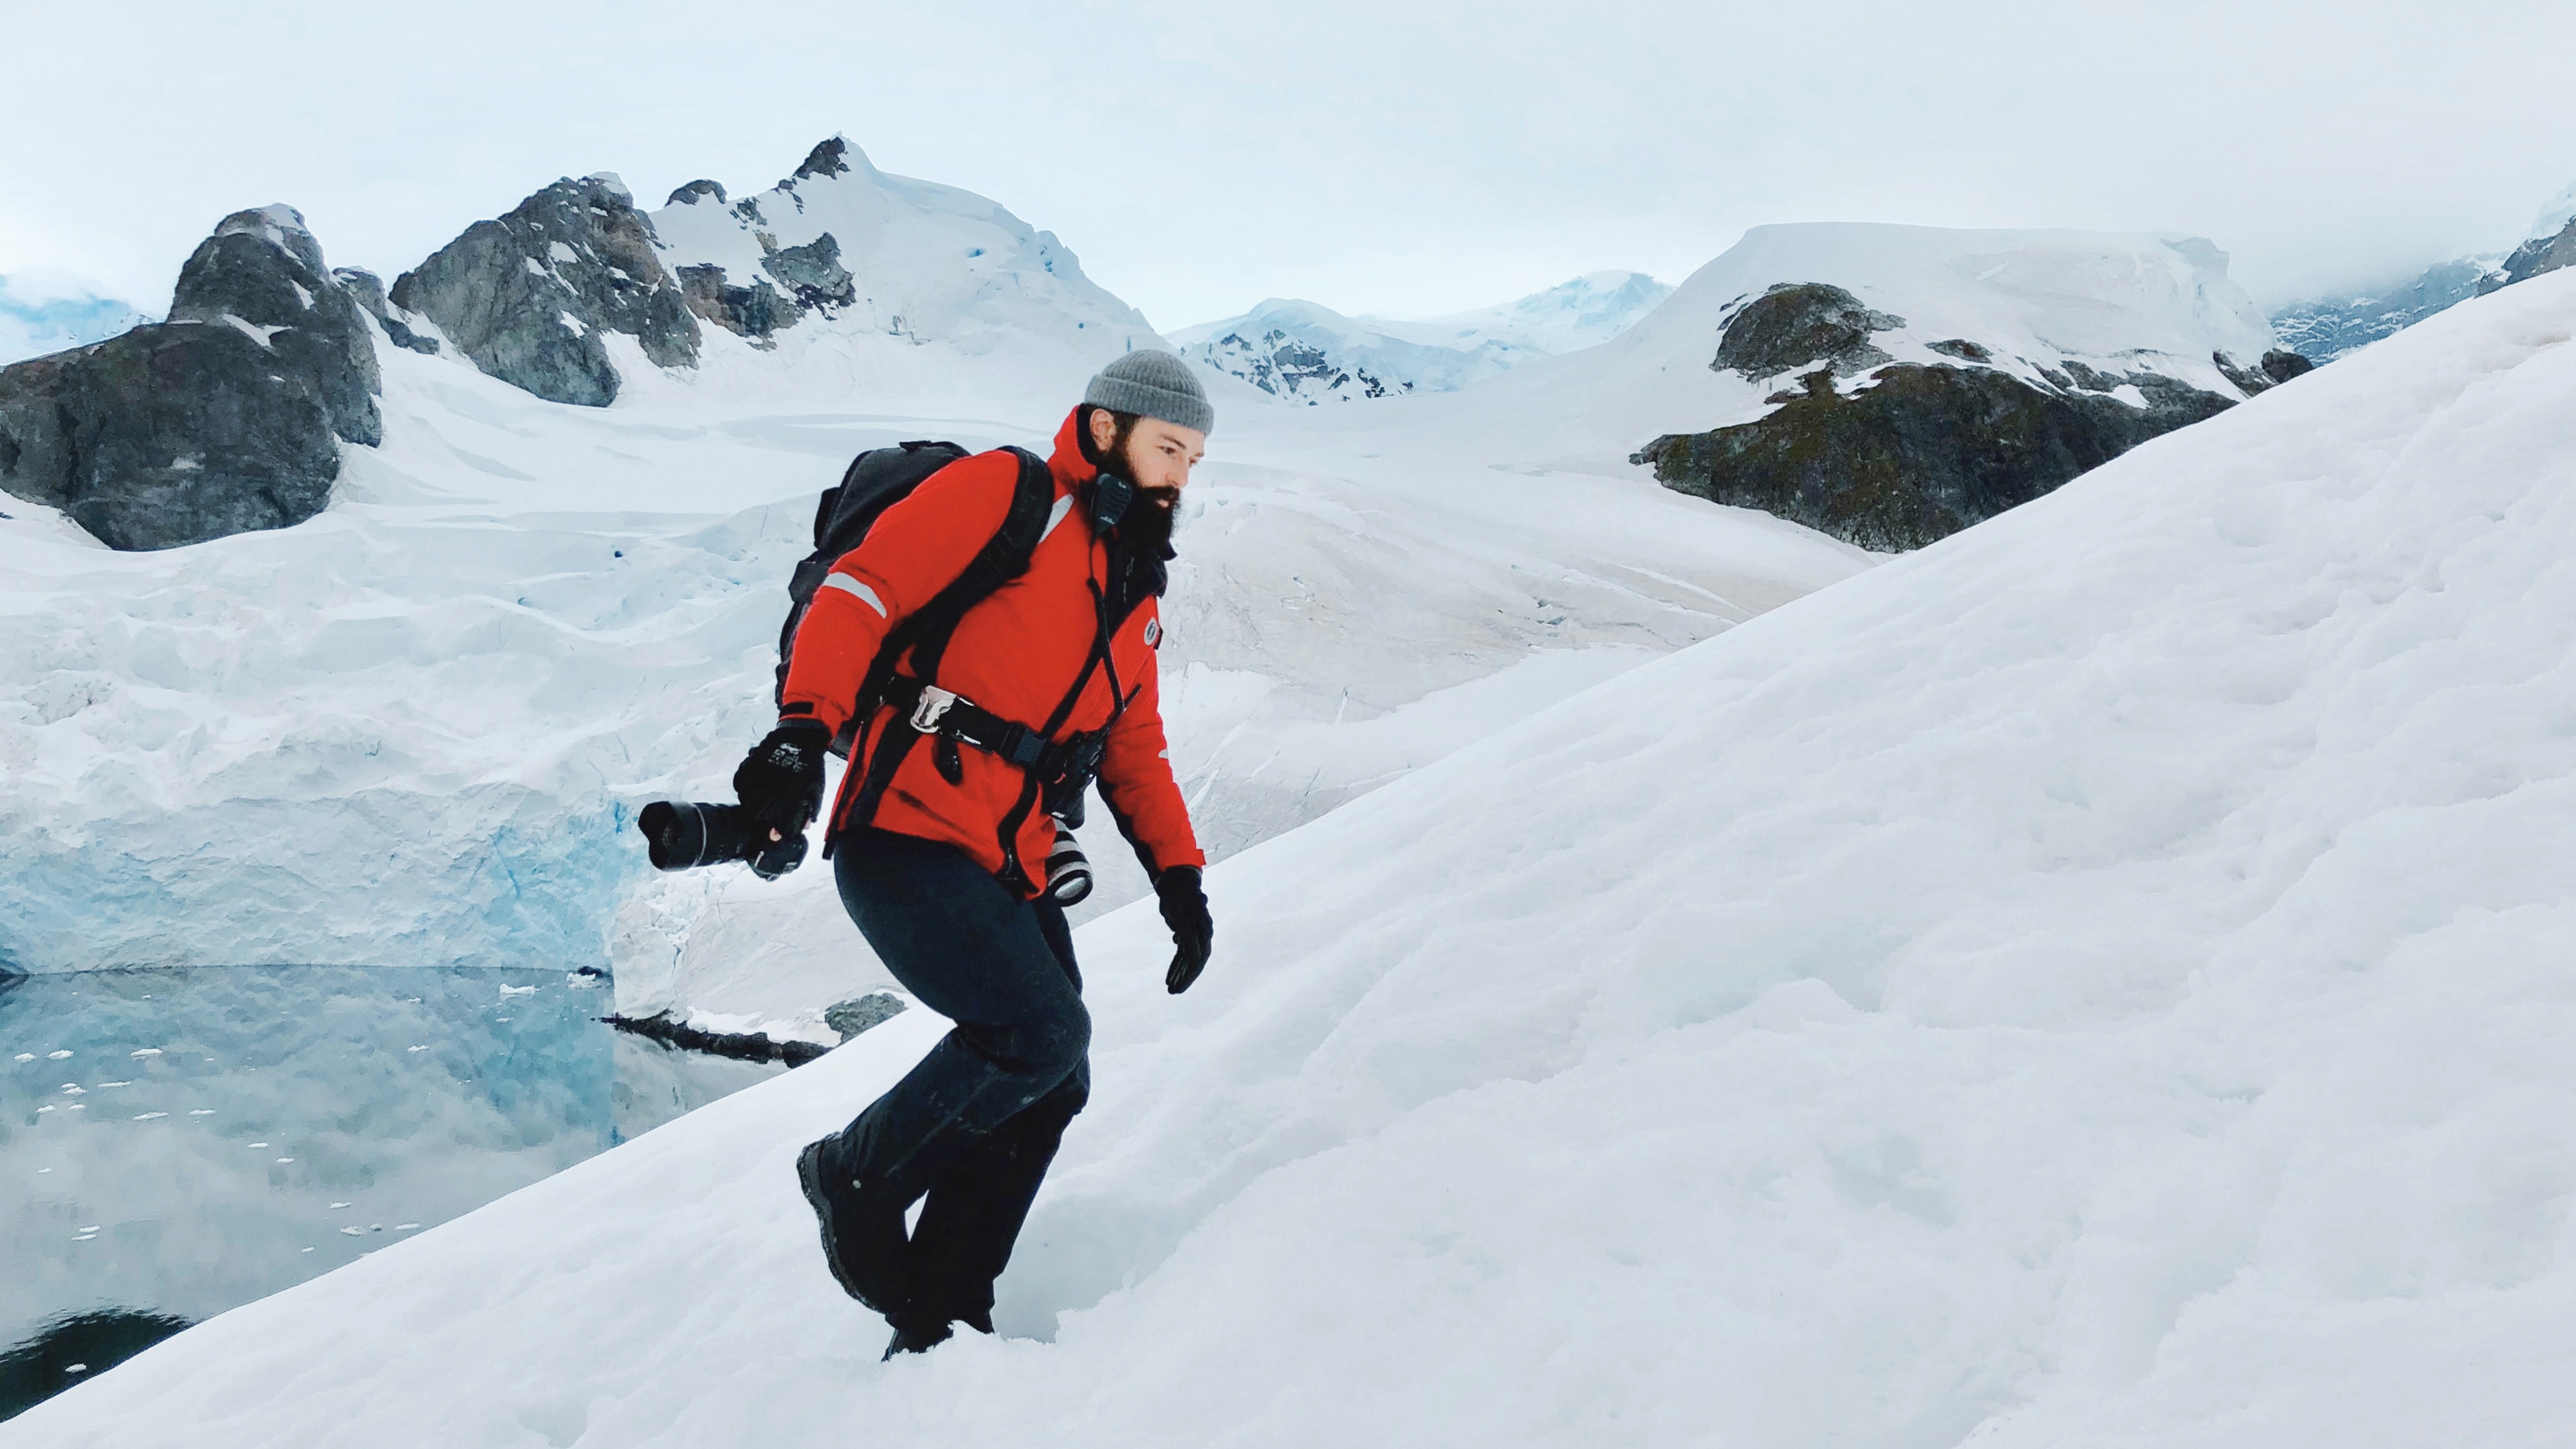 Photographer John Bozinov wears red jacket and walks in the snow and ice in the polar regions